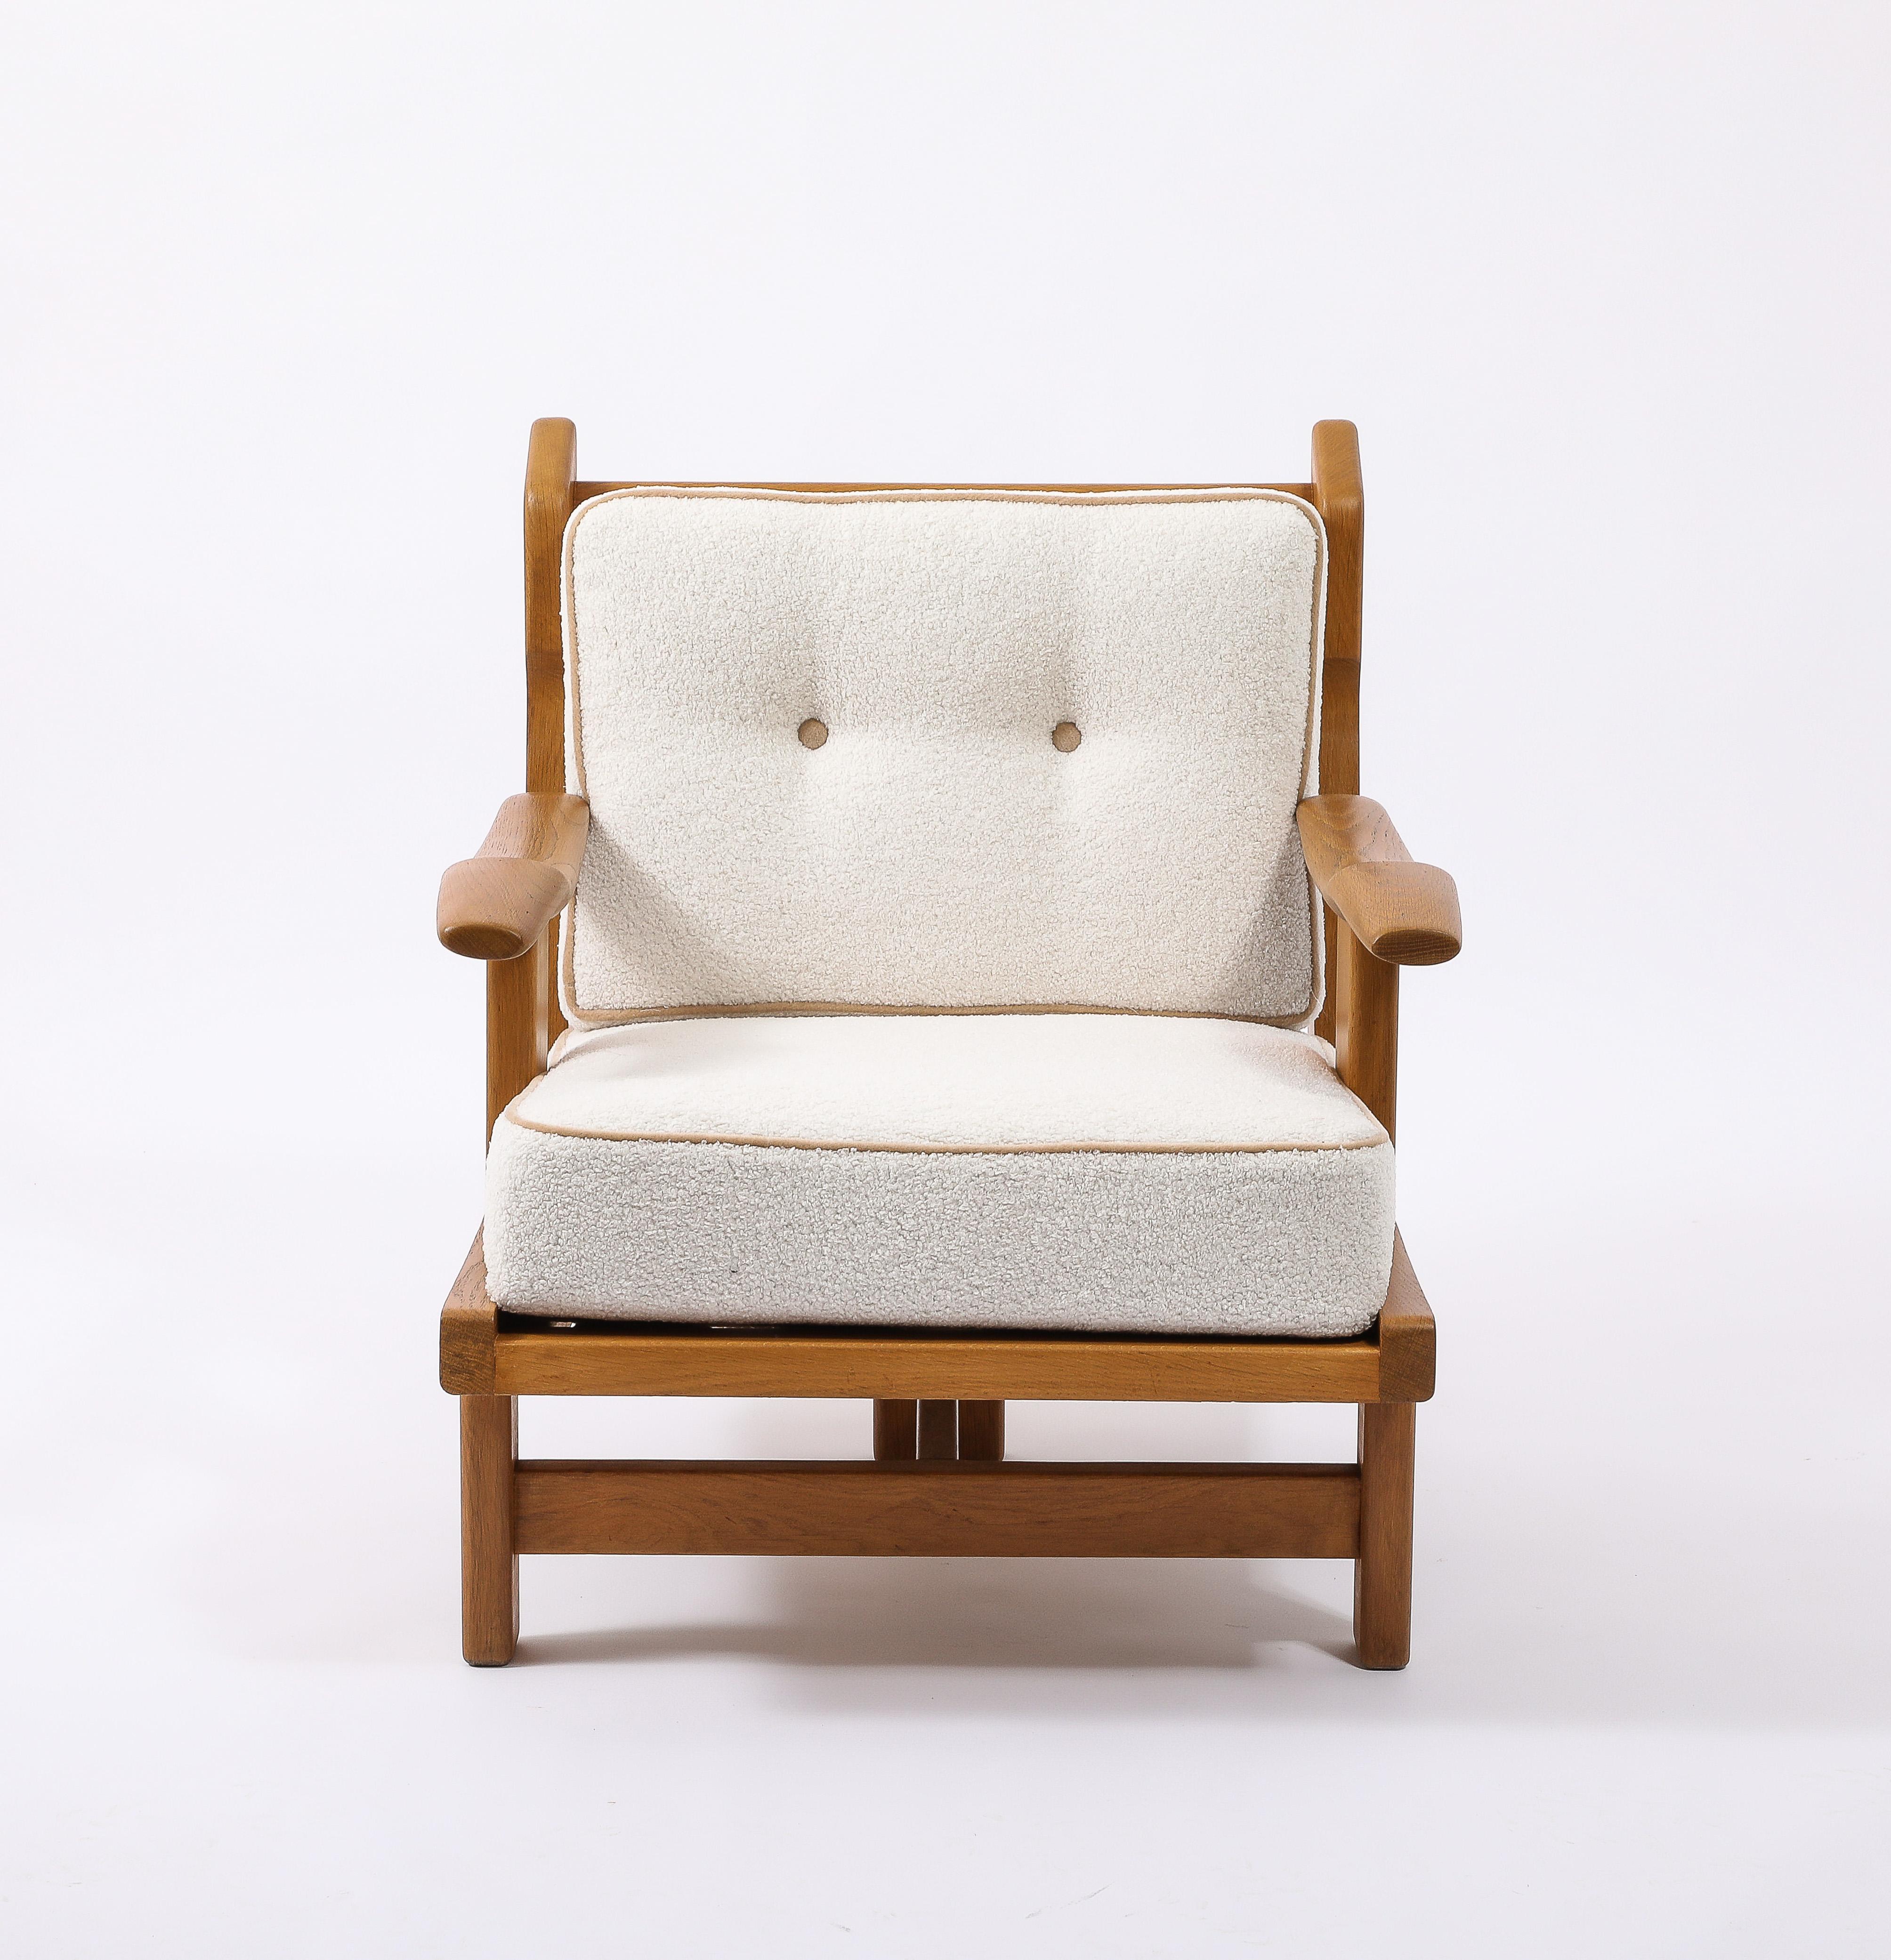 Rare and comfortable Tripod Oak armchair with separated arms. Refinished and reupholstered in a Pierre Frey Bouclé with contrasting piping and buttons.
